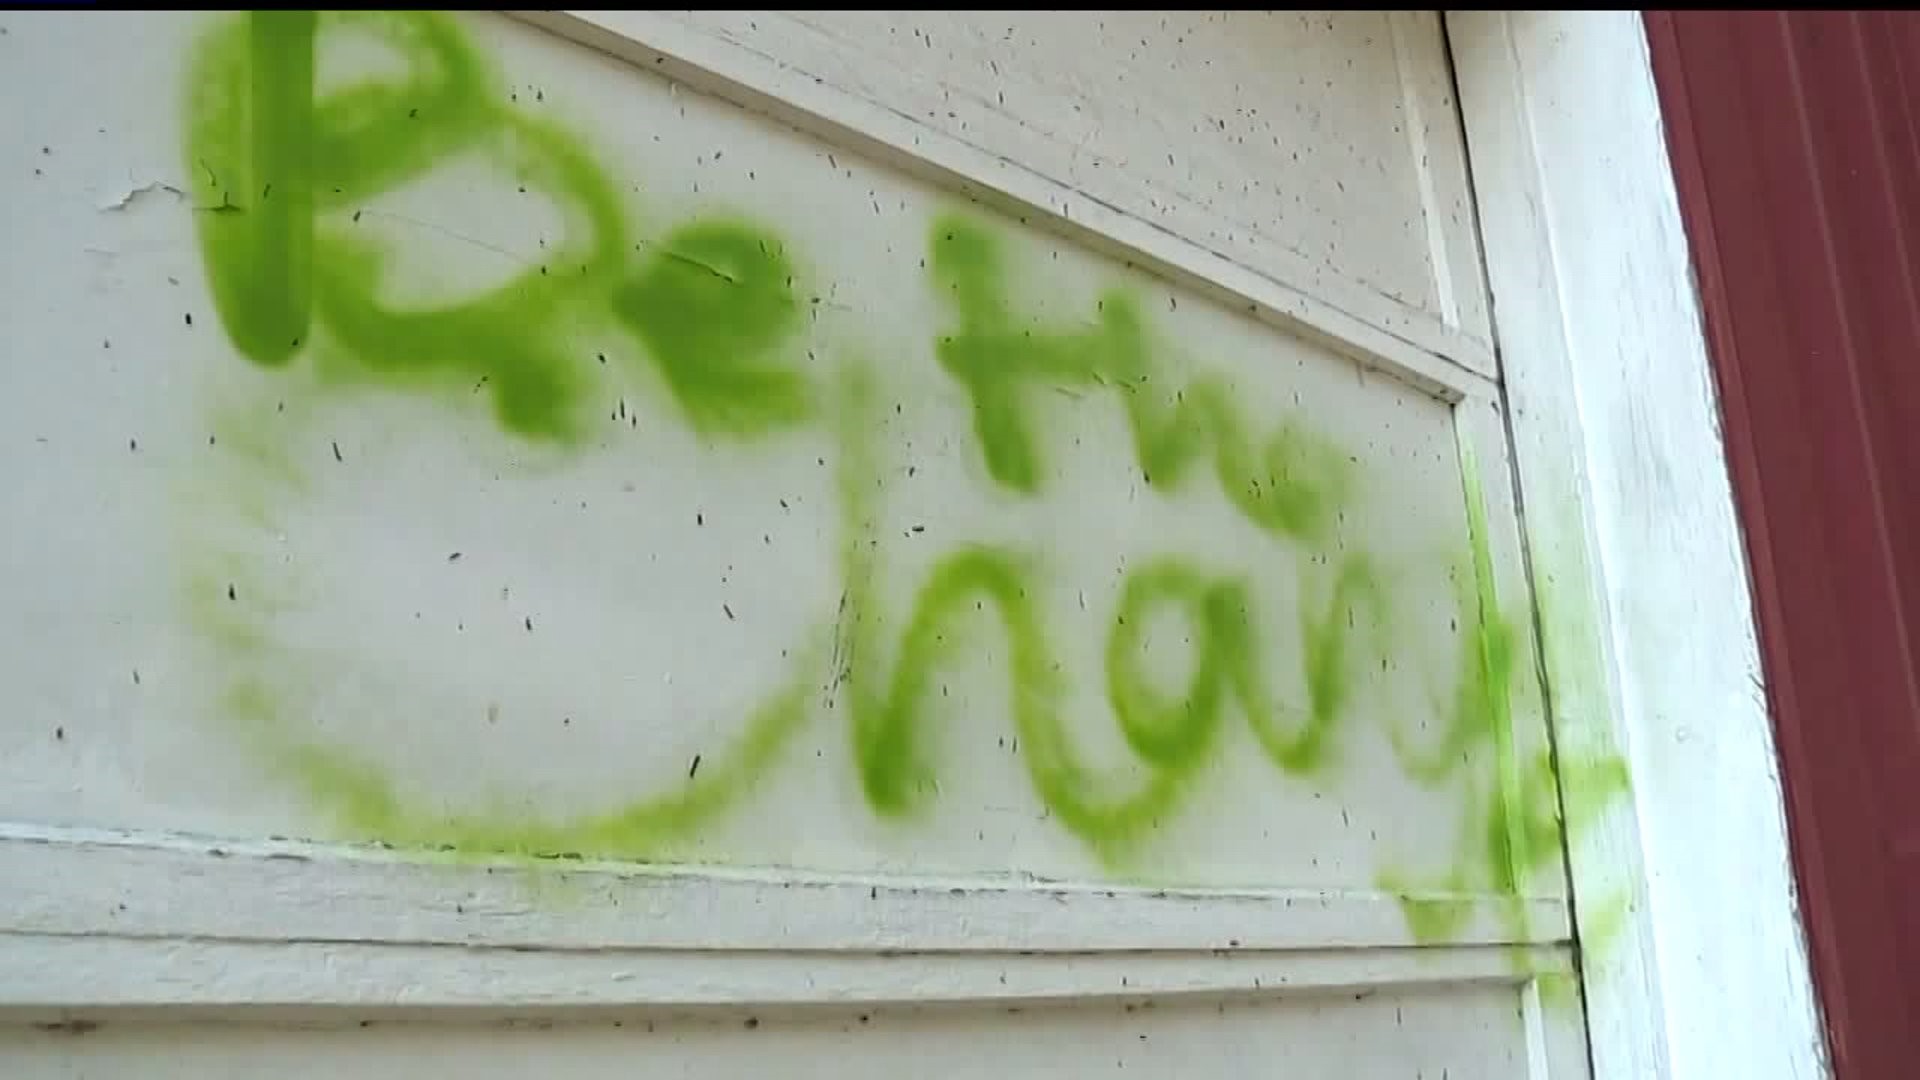 Vandalism at homes and businesses in Shrewsberry, York County